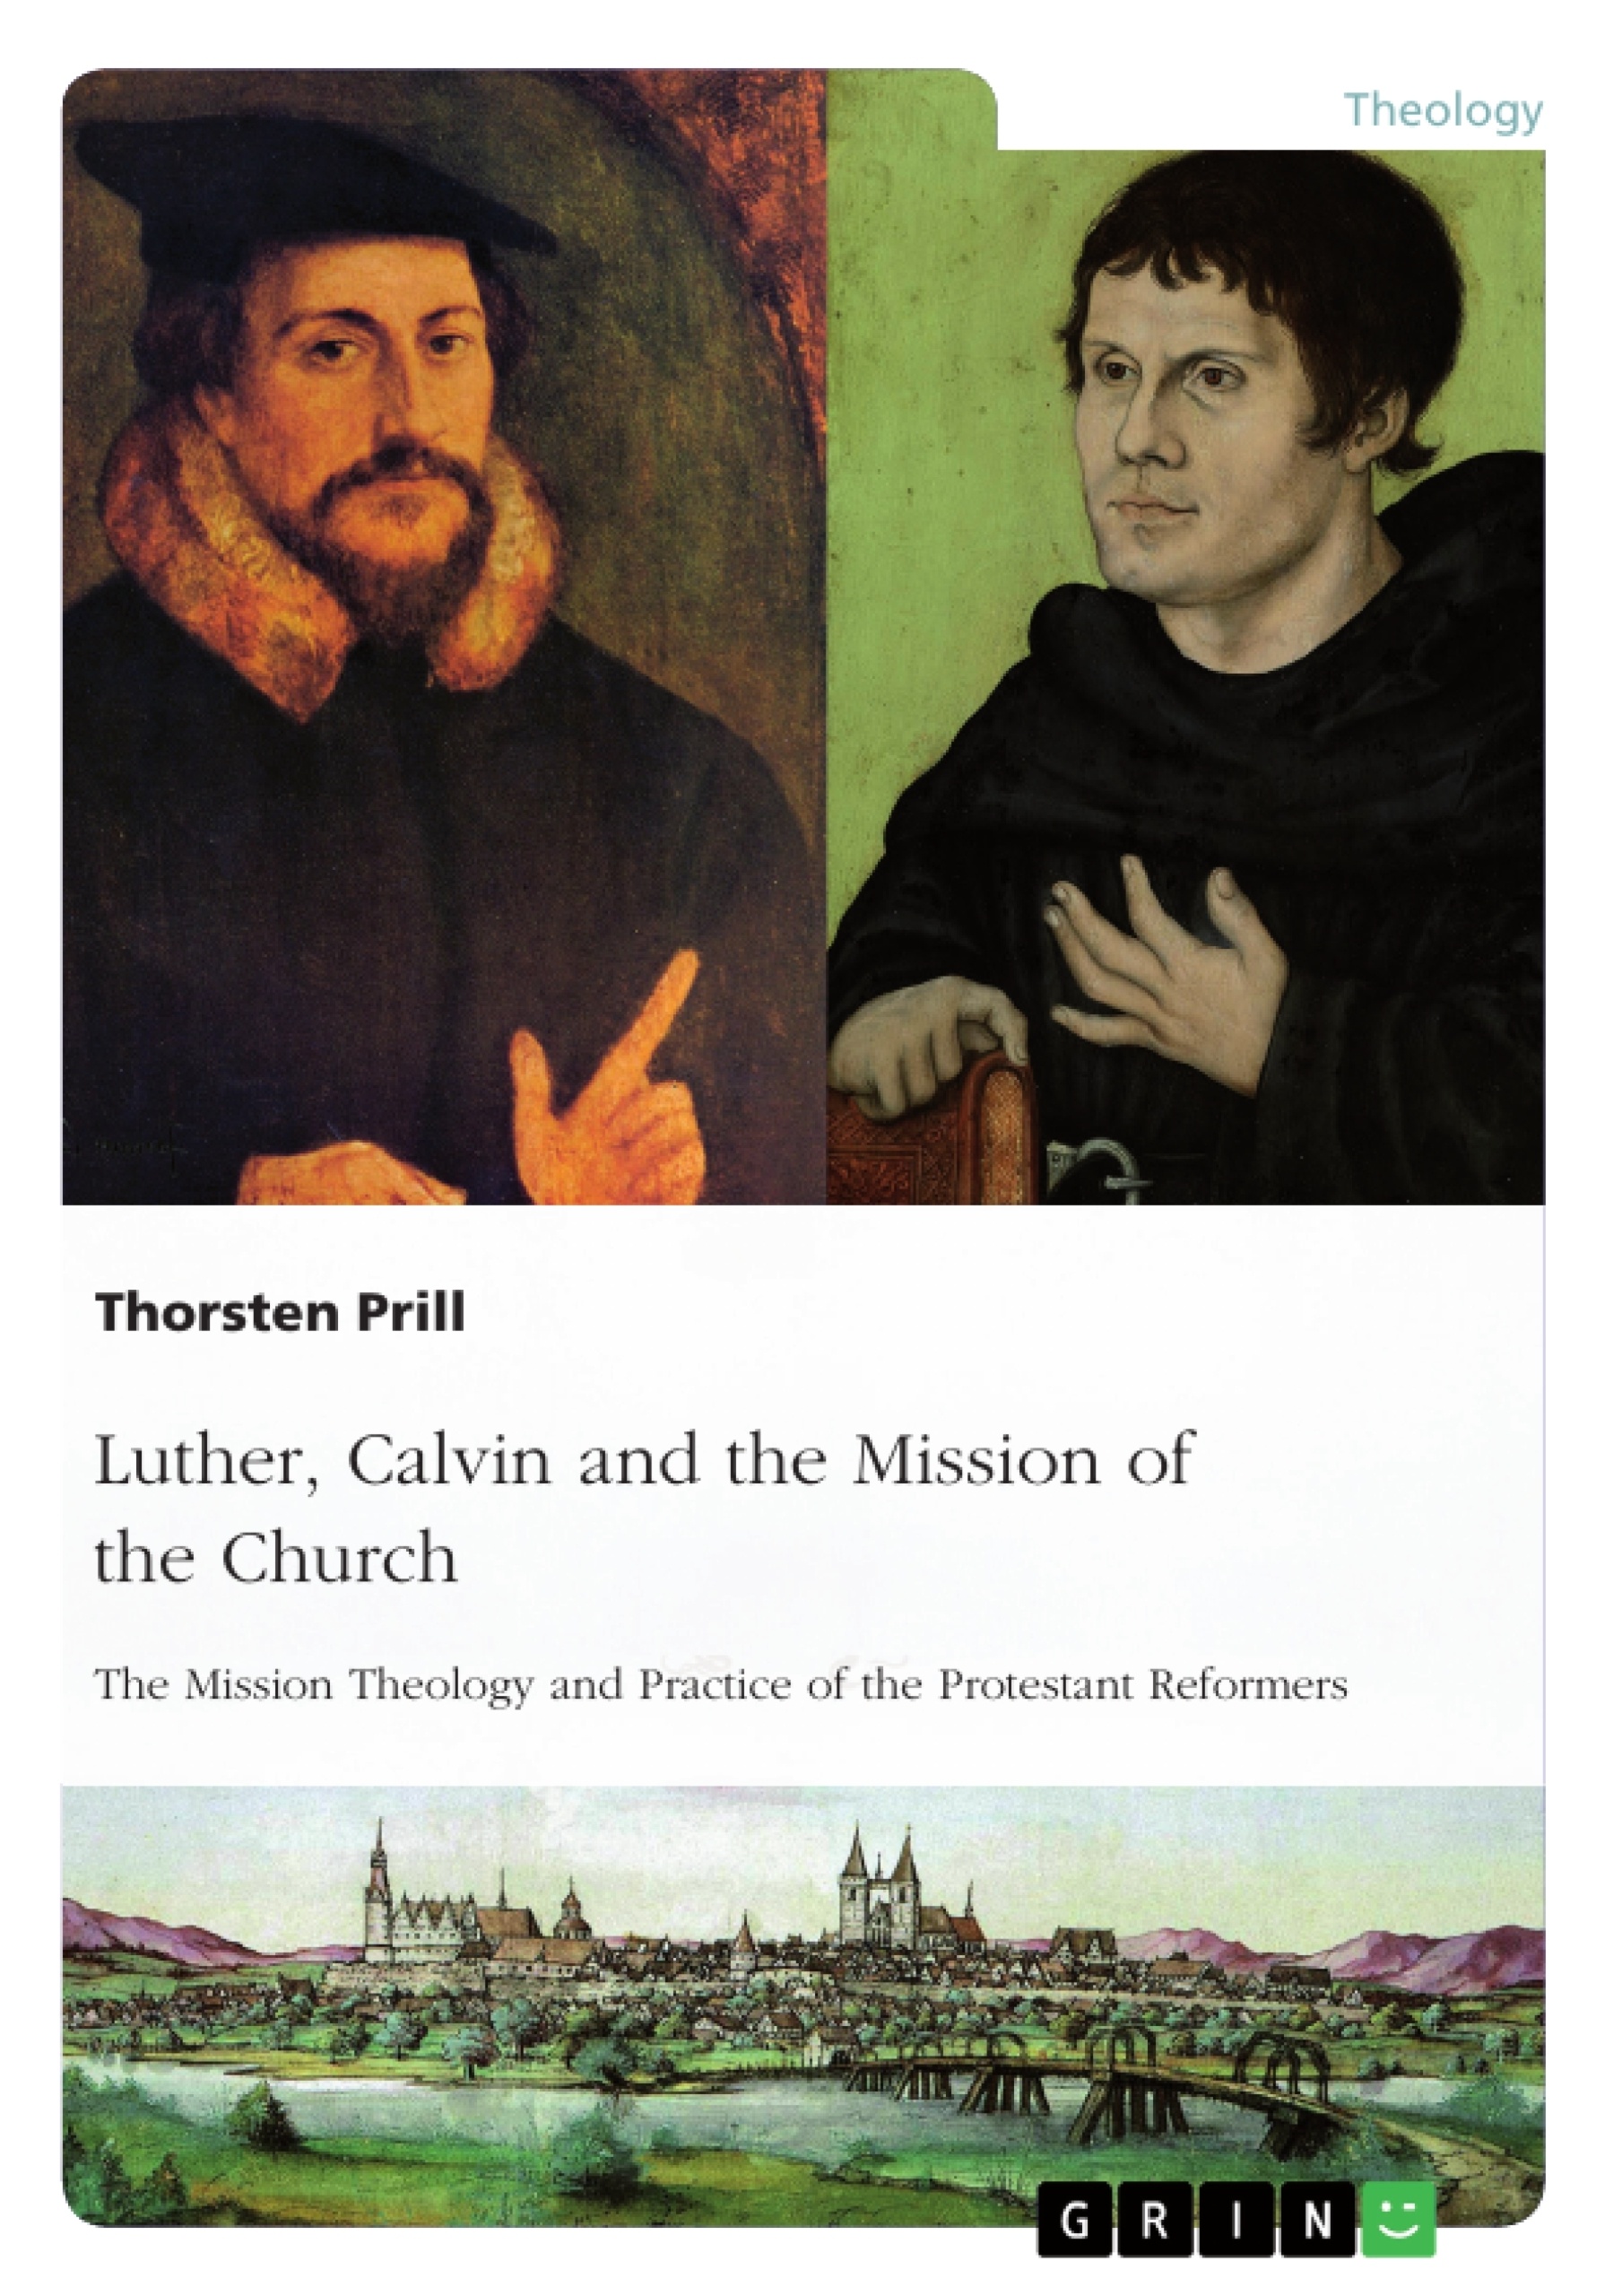 Title: Luther, Calvin and the Mission of the Church